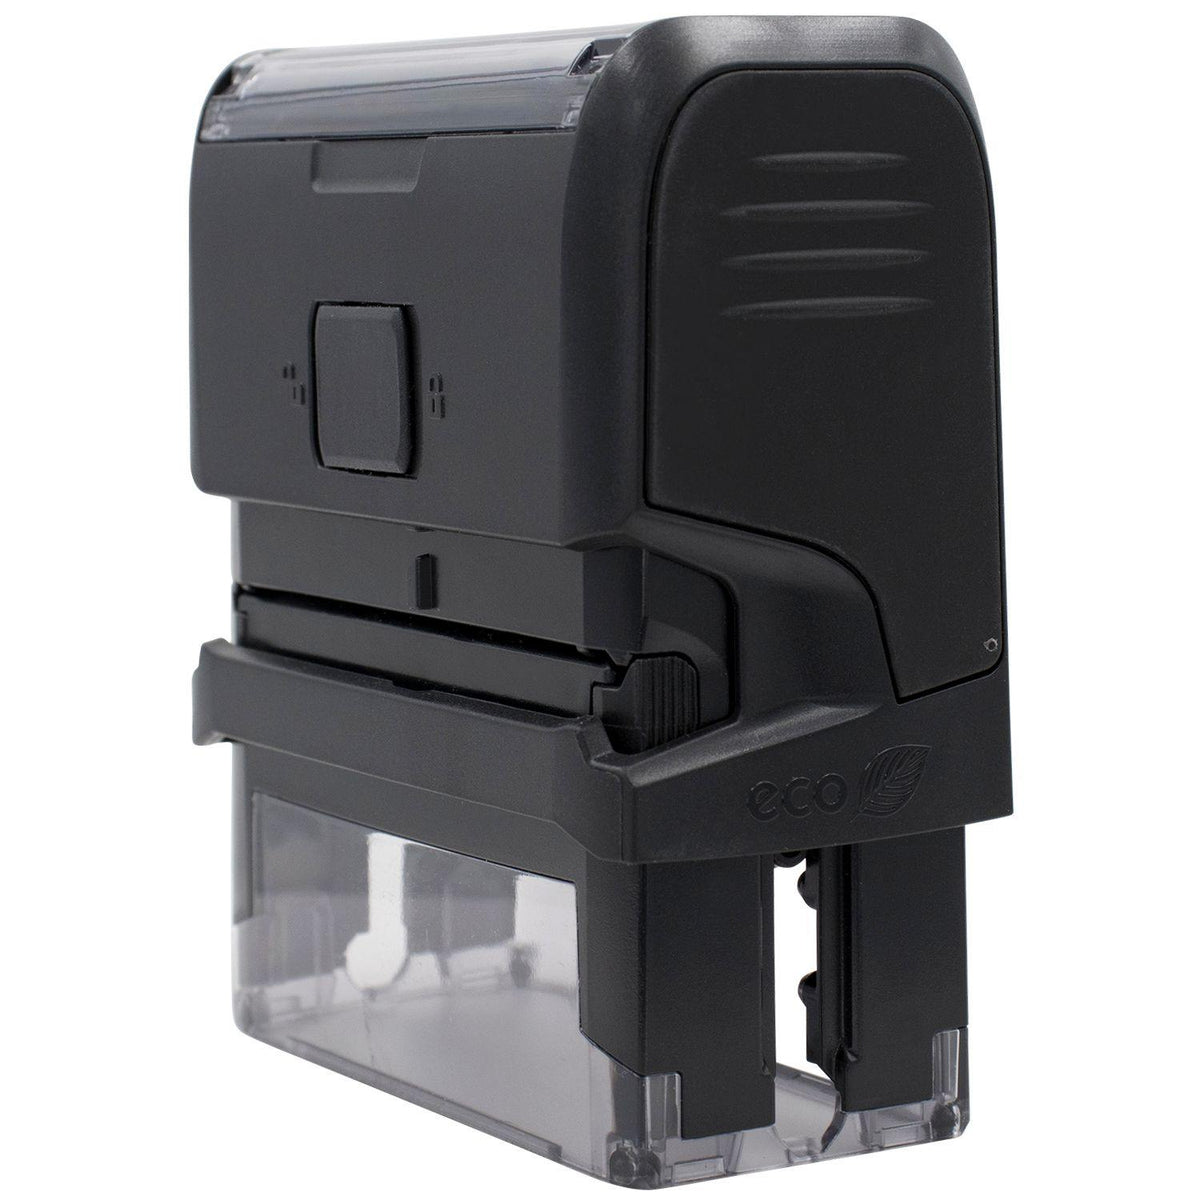 Large Self-Inking Standard Mail A Stamp - Engineer Seal Stamps - Brand_Trodat, Impression Size_Large, Stamp Type_Self-Inking Stamp, Type of Use_Postal &amp; Mailing